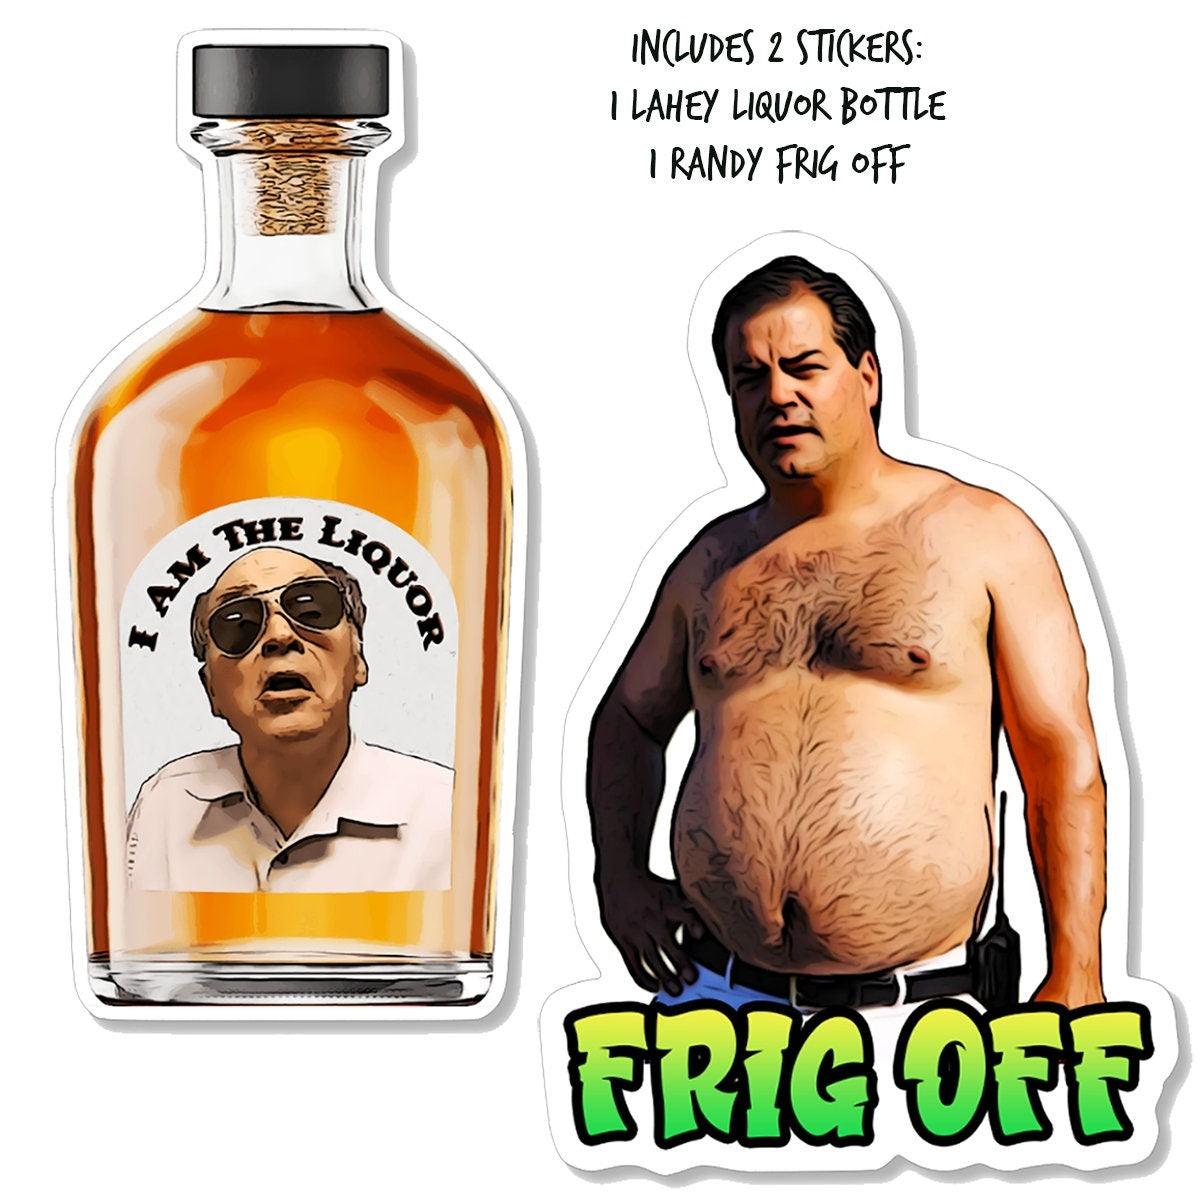 Trailer Park Boys Bubbles Sticker Pack (2 Pack) Mr. Lahey & Randy Stickers, Official Trailer Park Boys Merchandise, Trailer Park Boys Merch - Ottos Grotto :: Stickers For Your Stuff